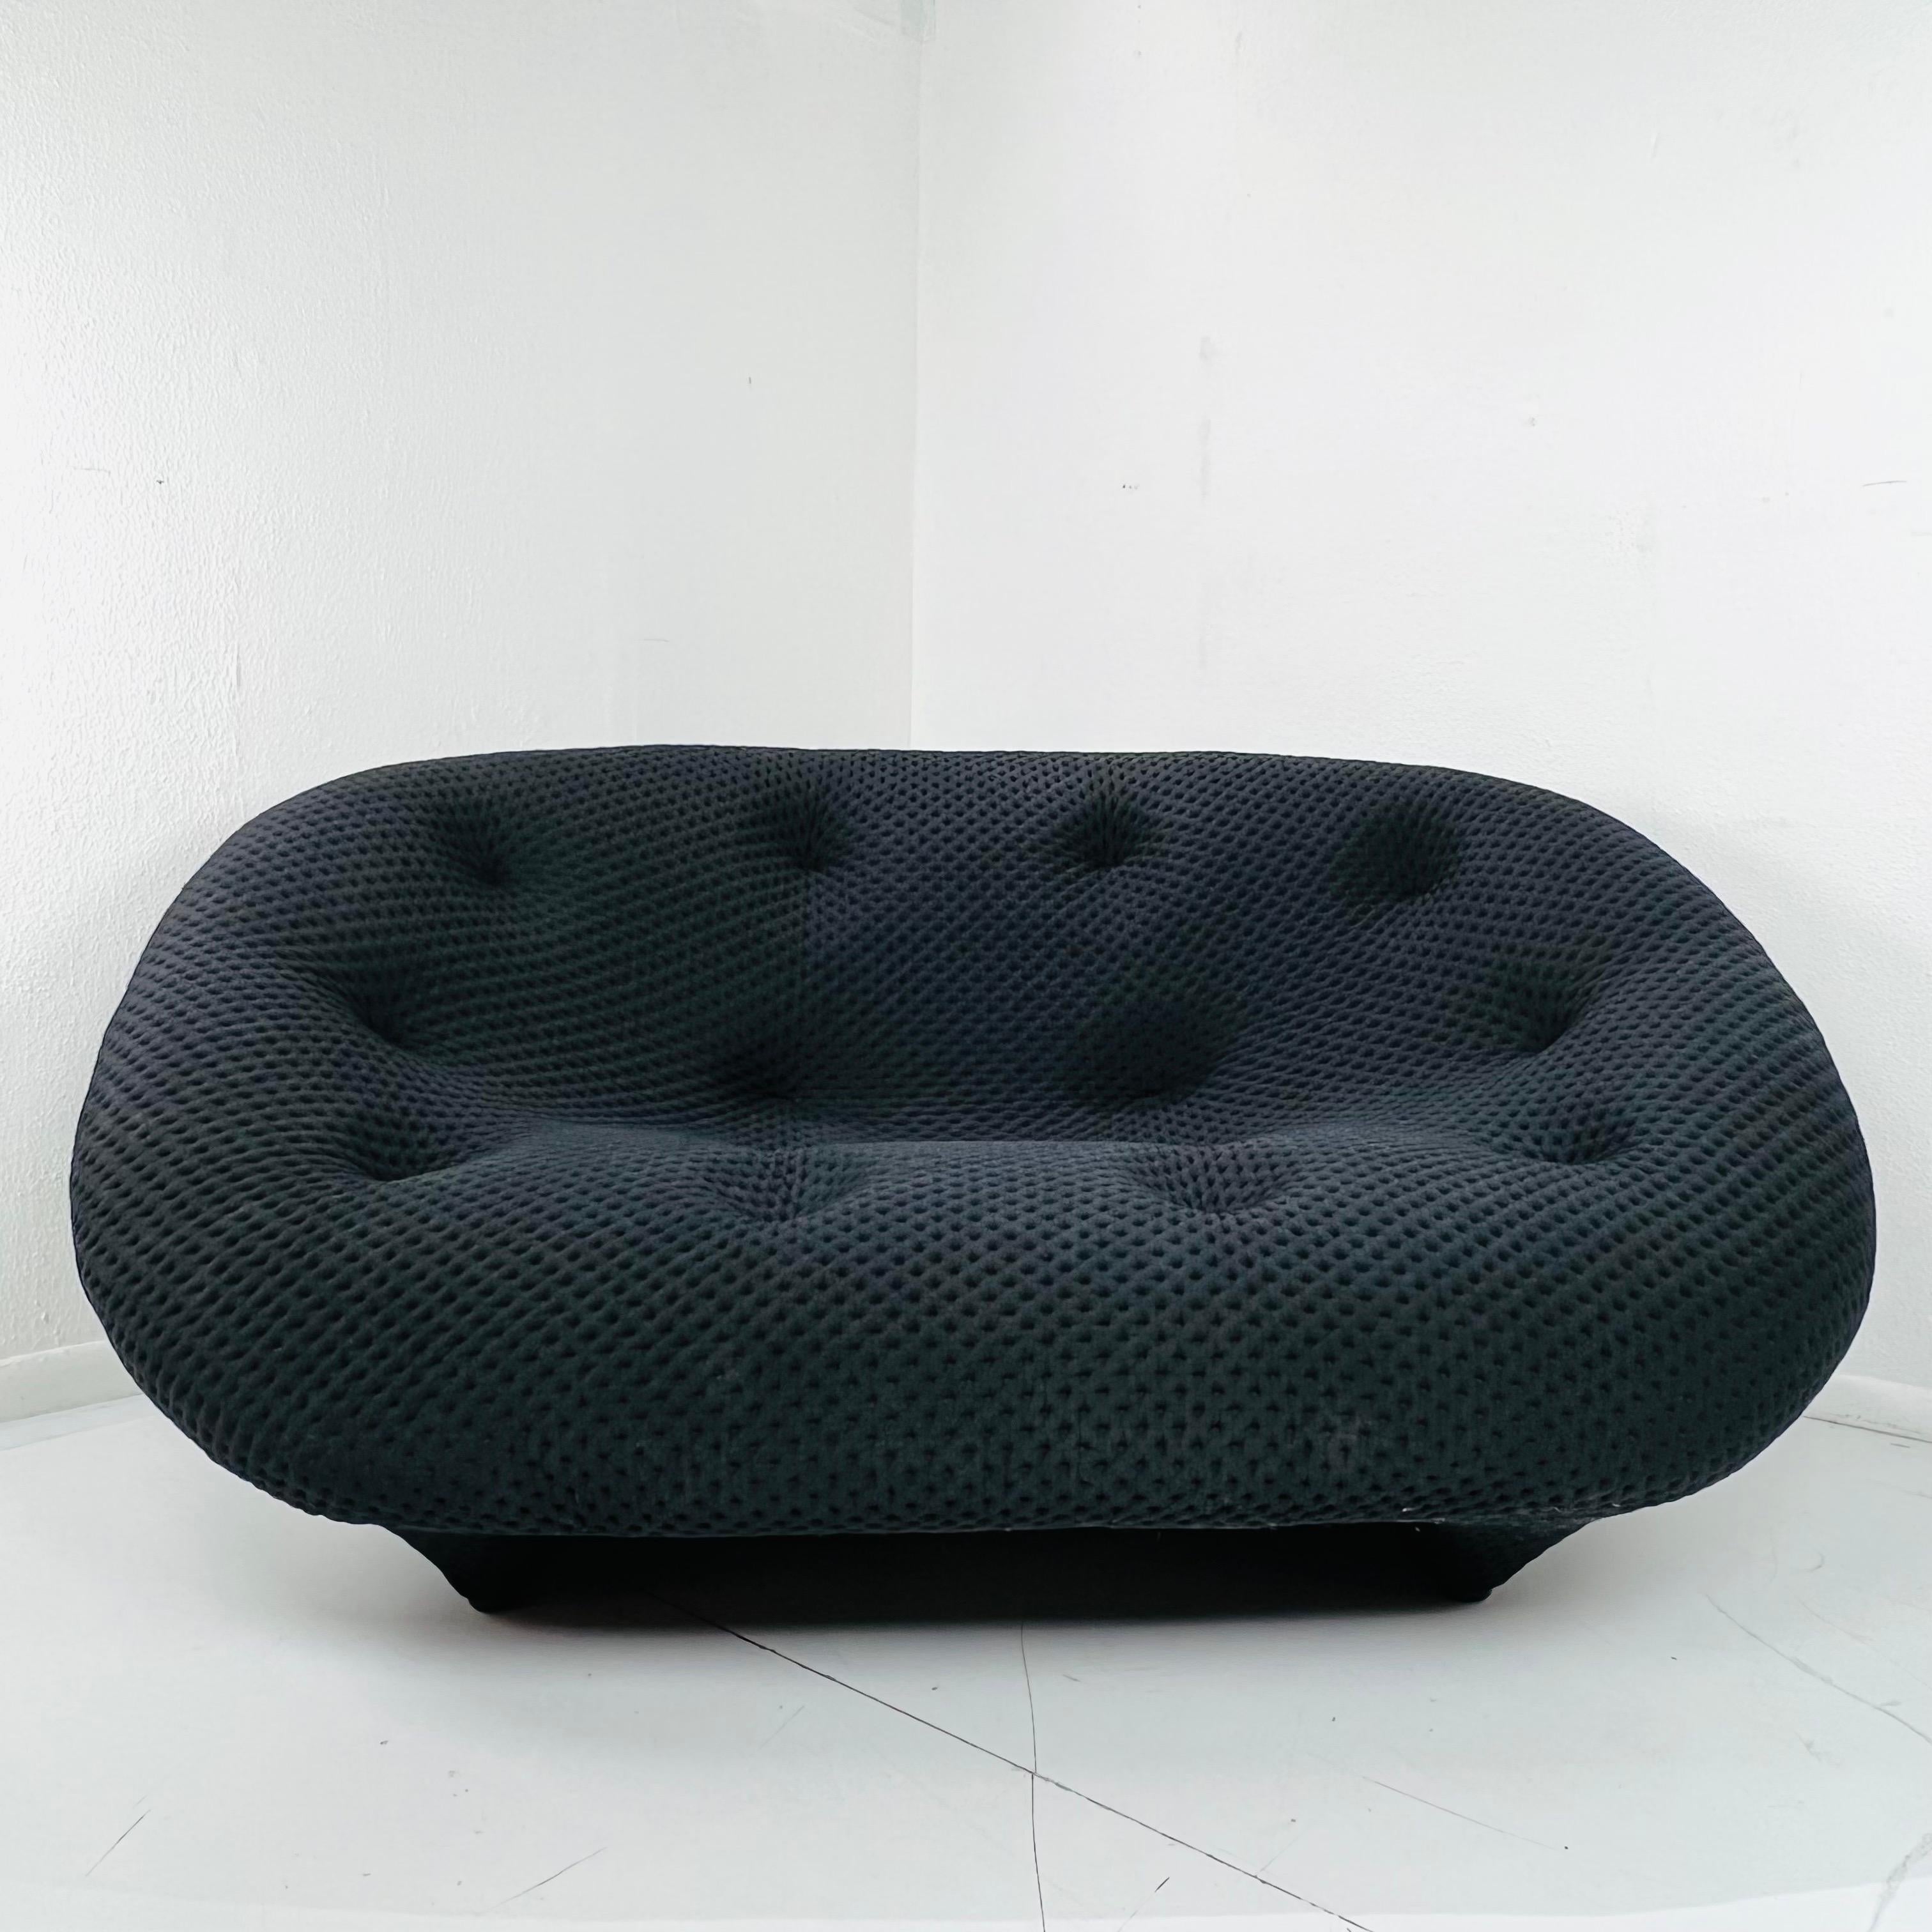 Ploum Loveseat by Ligne Roset. Design by R. & E. Bouroullec. A result of a special combination of two materials: a stretchable covering and ultra-soft foam. This combination, along with the Ploum sofas’ truly ample dimensions, provides extreme